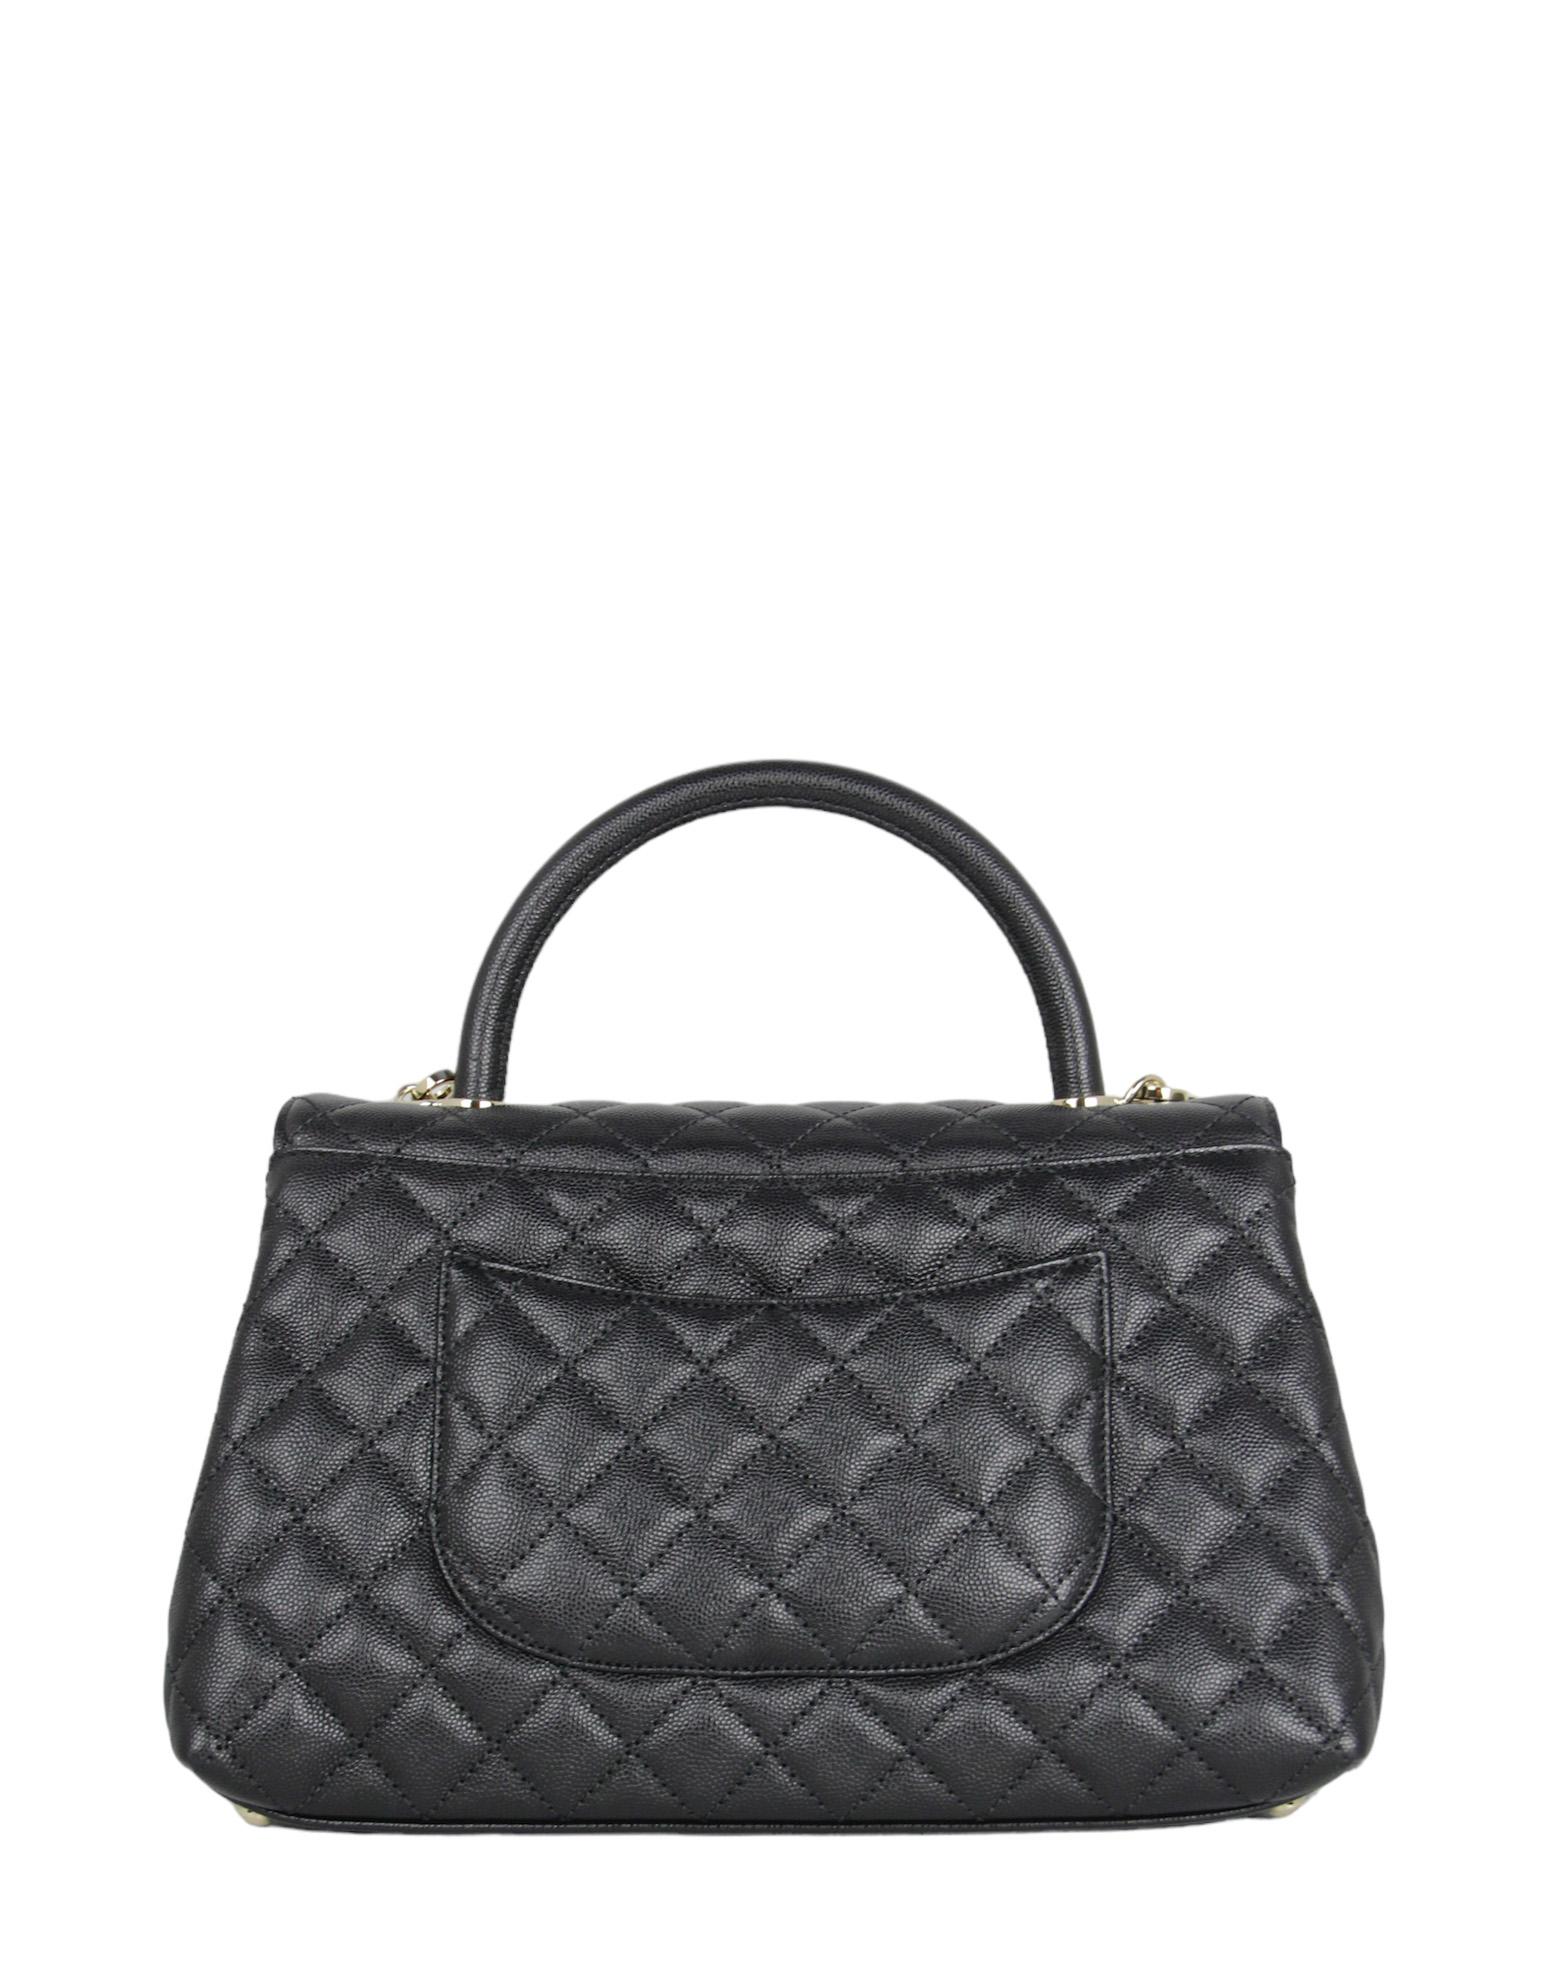 Chanel Black Caviar Leather Quilted Small Coco Handle Bag Flap Bag In Excellent Condition For Sale In New York, NY